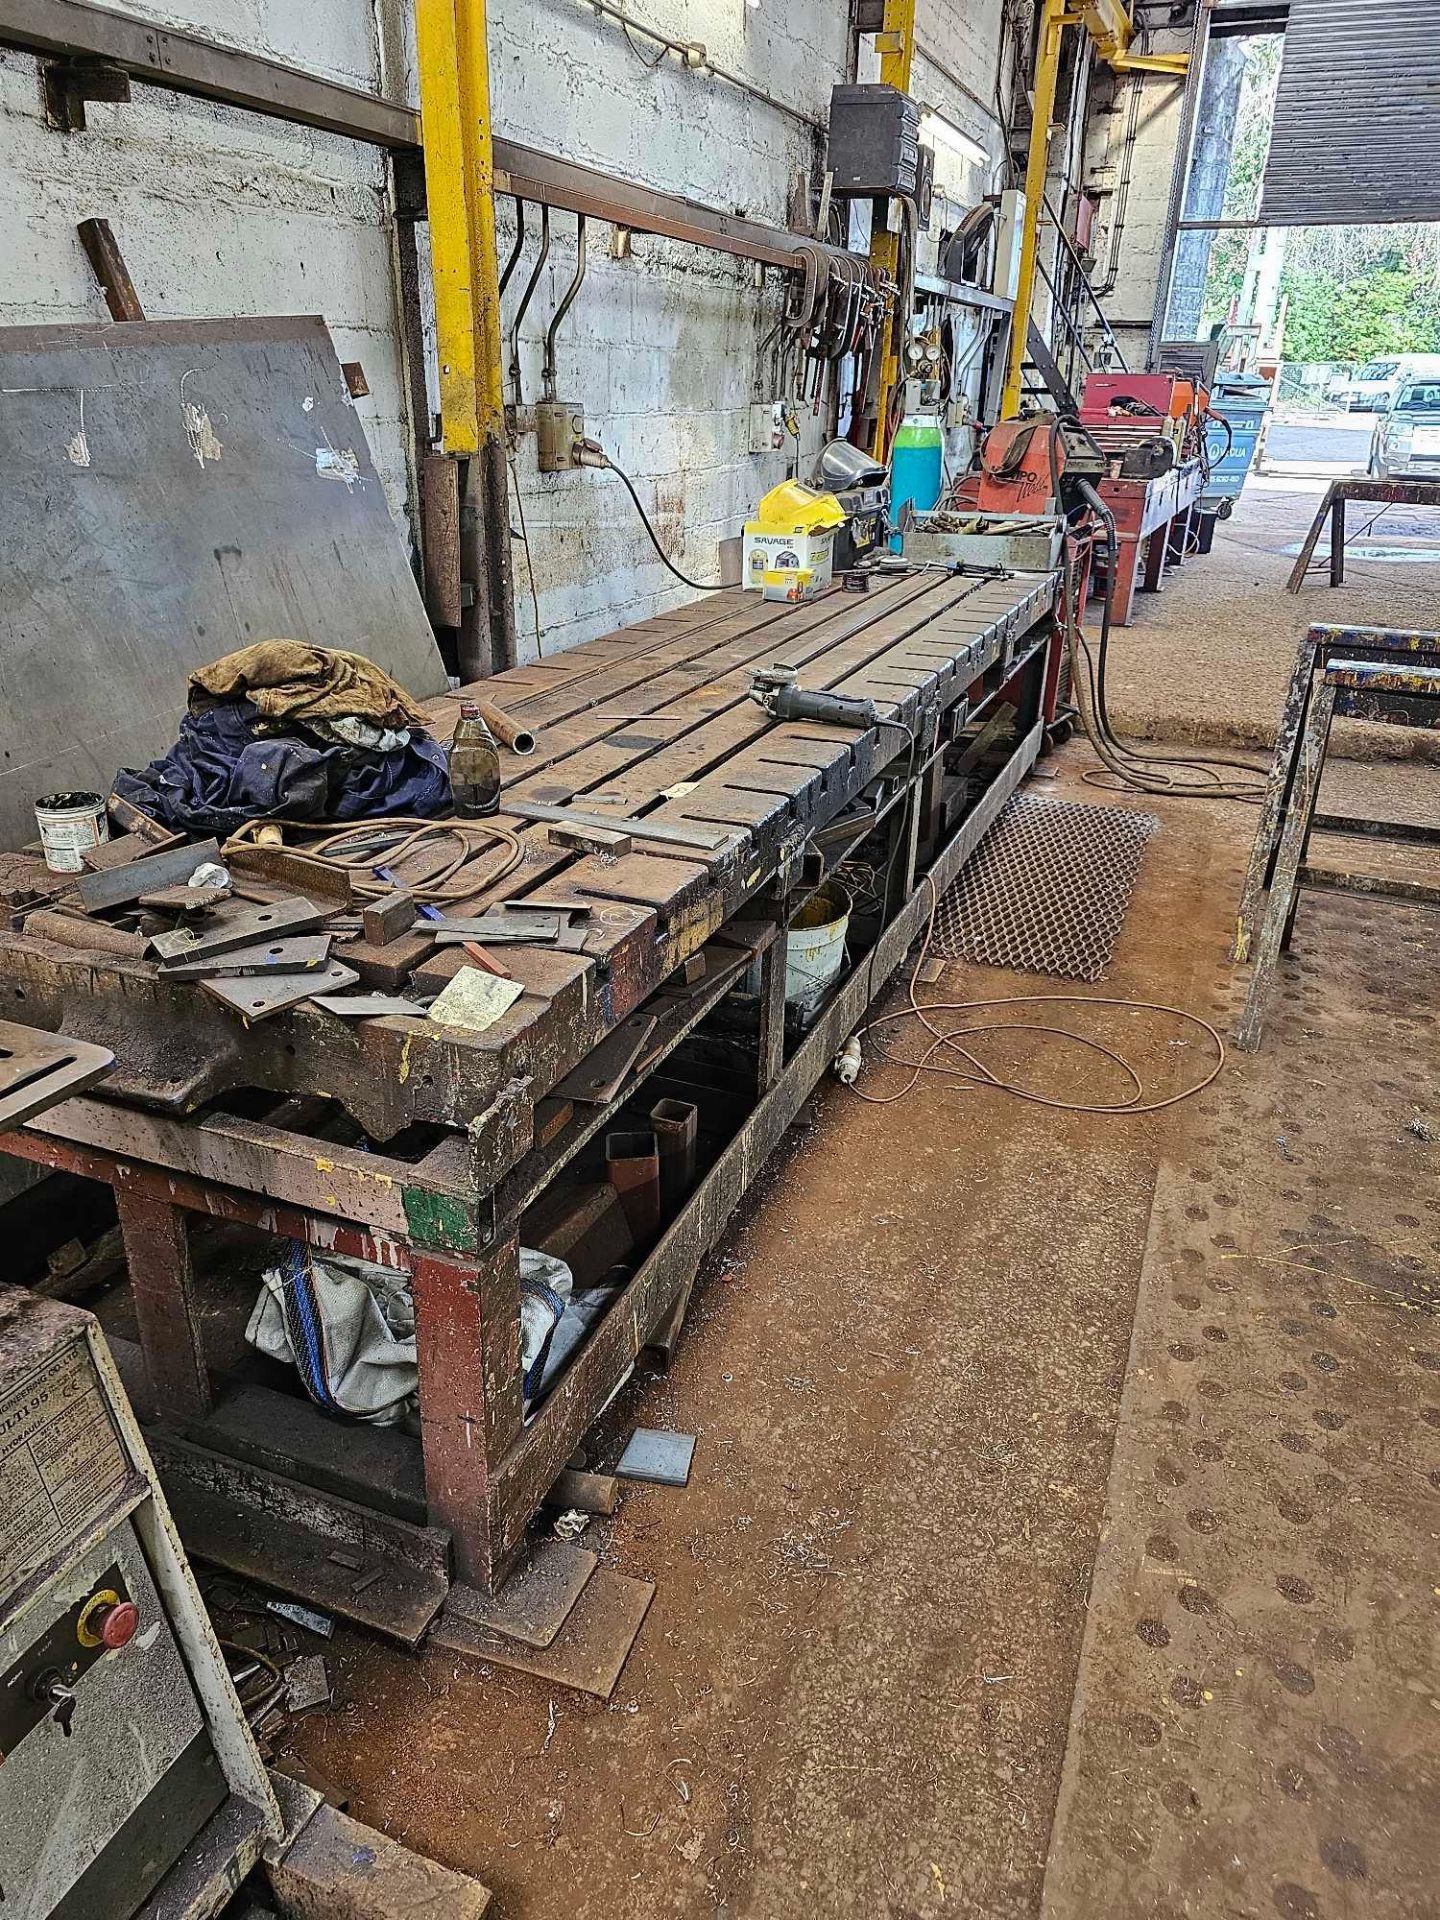 Cast Steel Engineers Marking Out Work Bench 477 x 105 x 86cm Weight 3900kg - Image 2 of 3